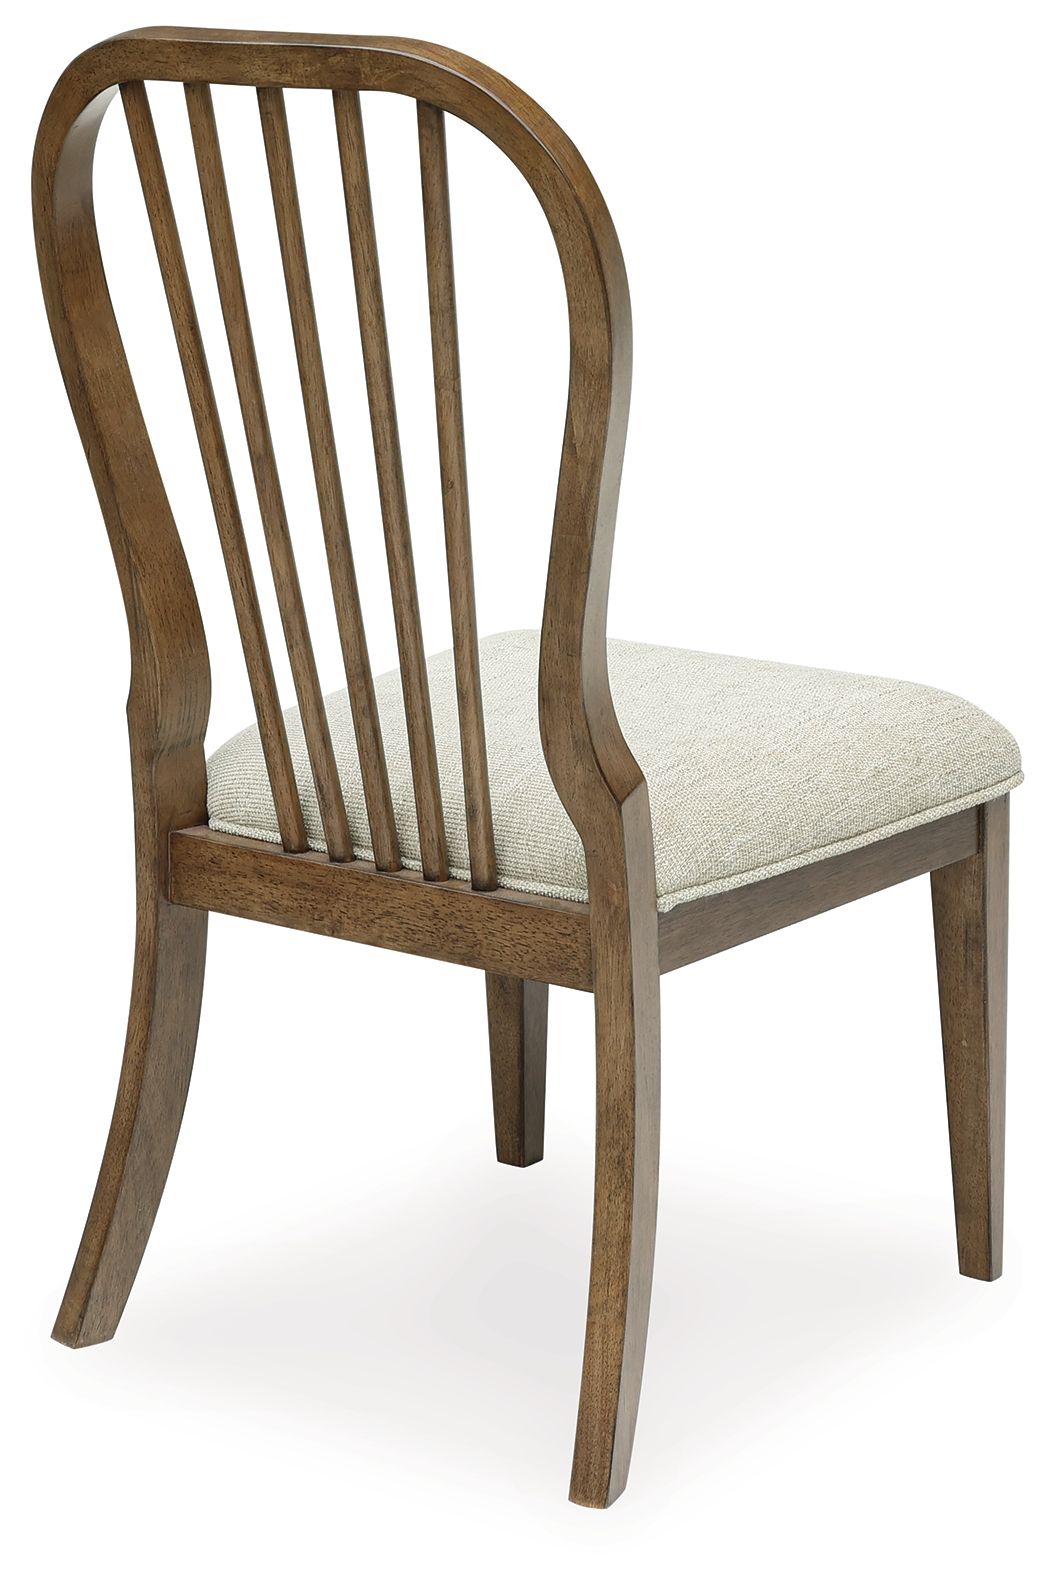 Sturlayne - Brown - Dining Upholstered Side Chair (Set of 2) - Spindleback - Tony's Home Furnishings